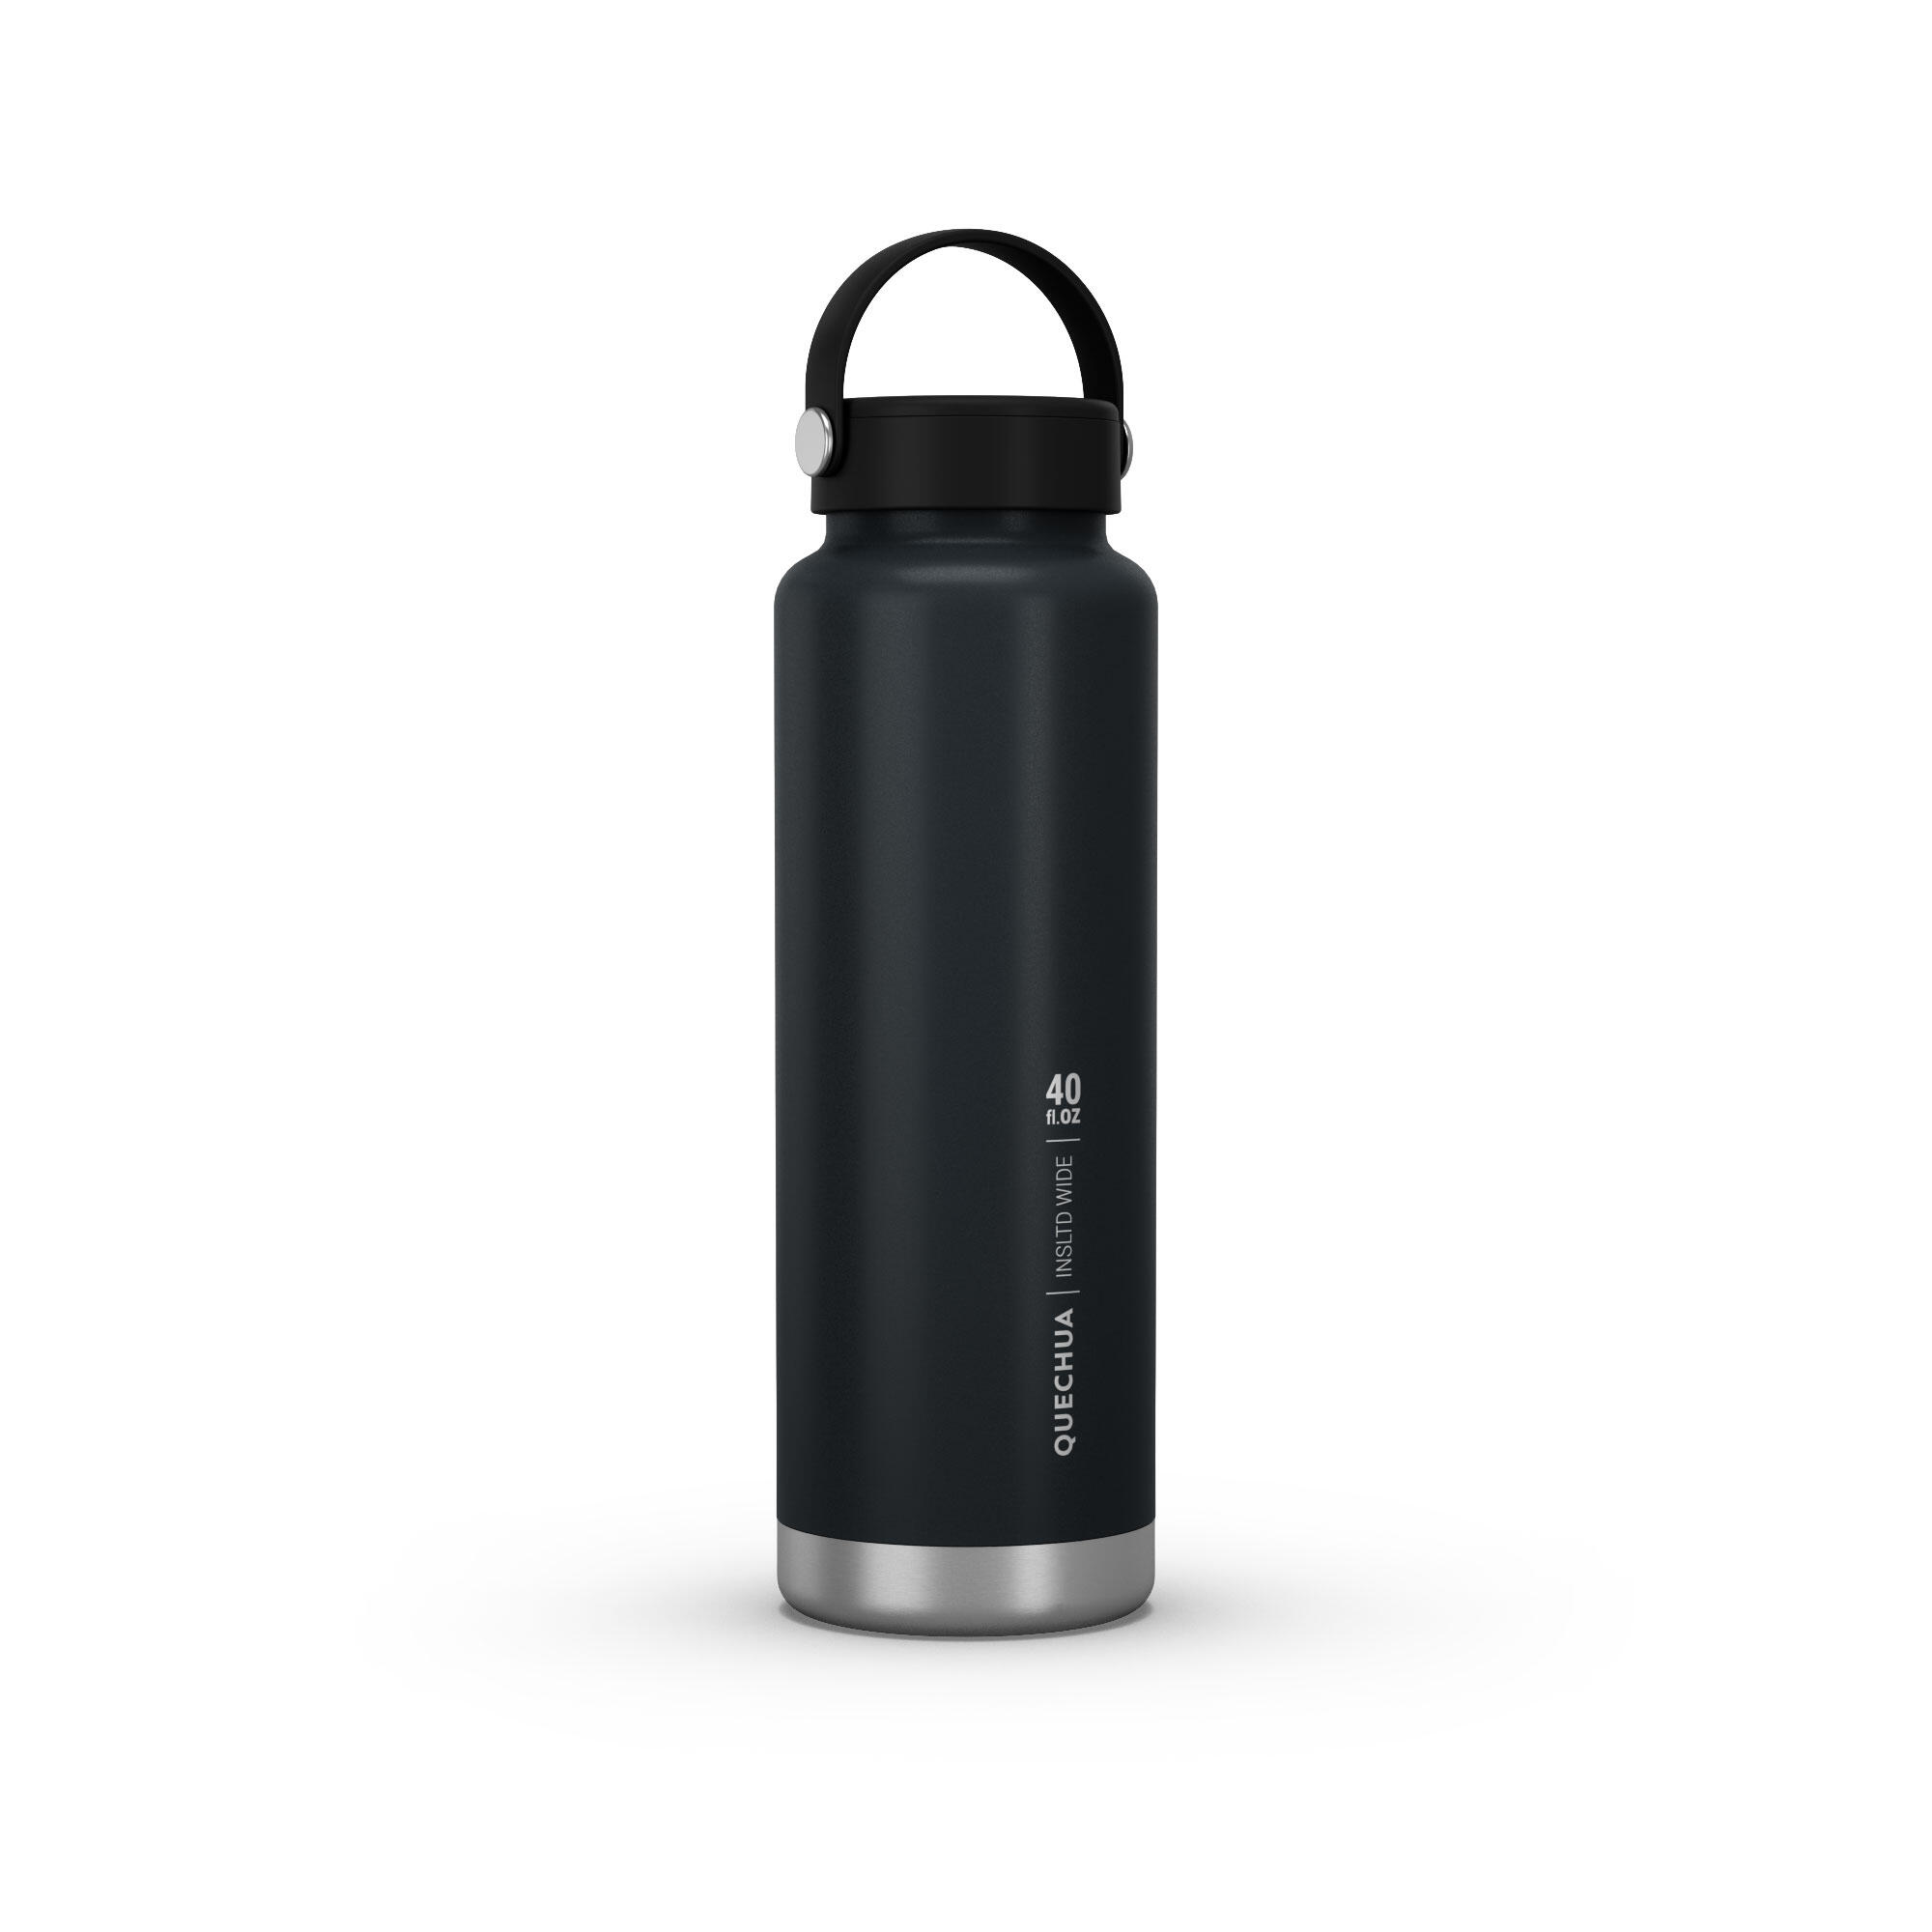 Thermal MH100 bottle (stainless steel, double vacuum wall) 1.2L wide neck, black 1/10